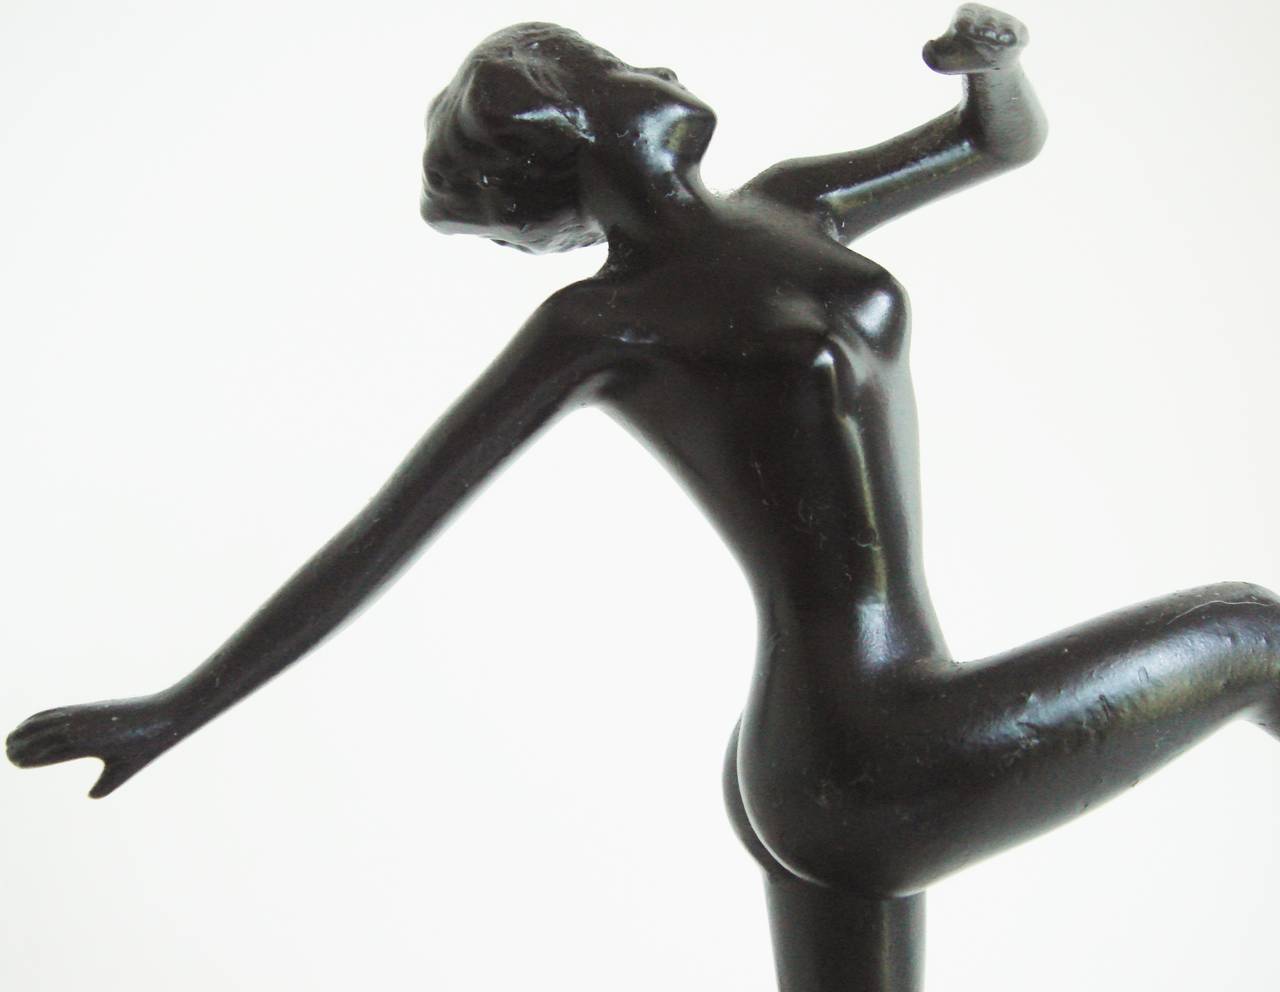 This fabulous English Art Deco chrome and black figural striker table lighter incorporates an ebulliently prancing nude female figure by Lorenzl enamelled in black. She stands on a chrome disk base in front of a hexagonal chrome pillar that holds